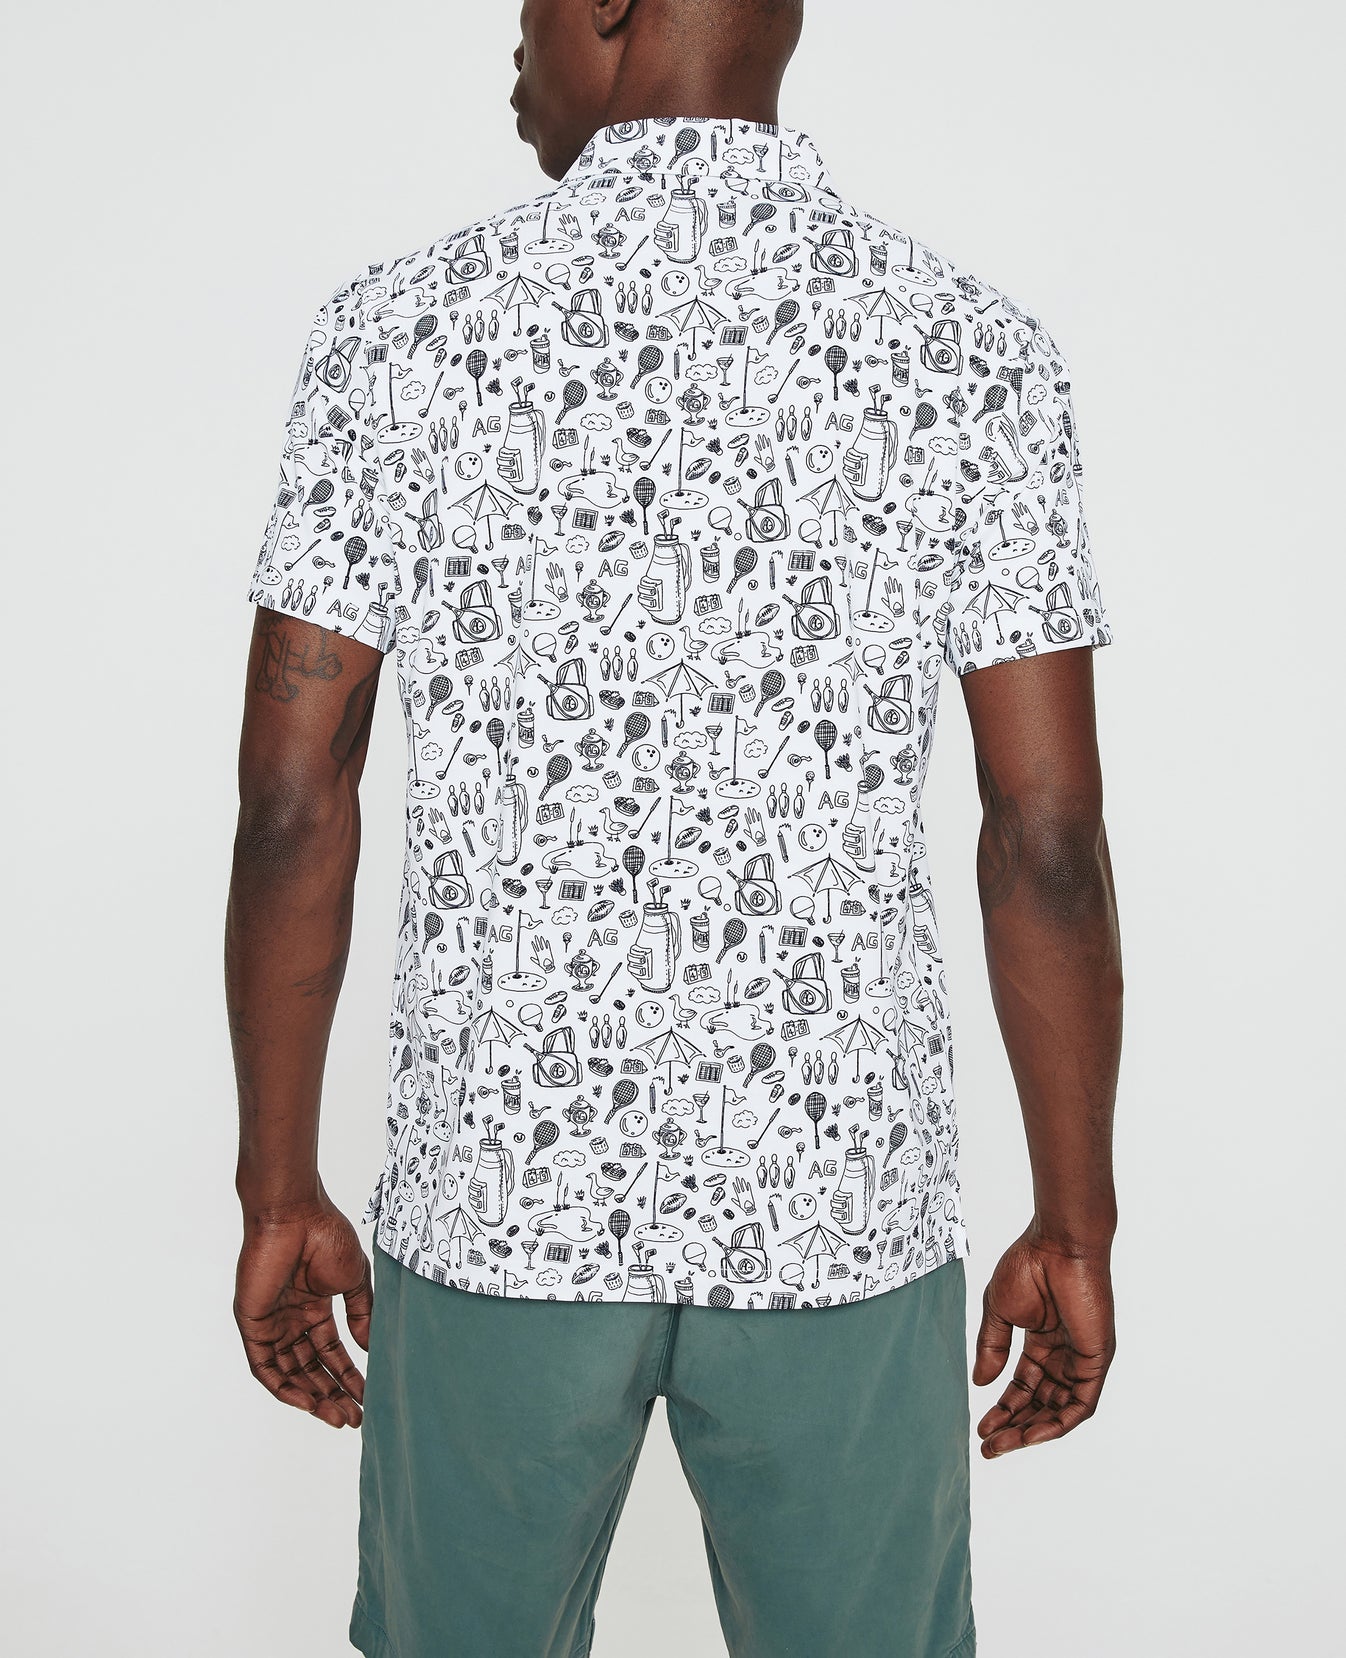 Bryce Polo Sports Doodle White Mens Top Photo 6